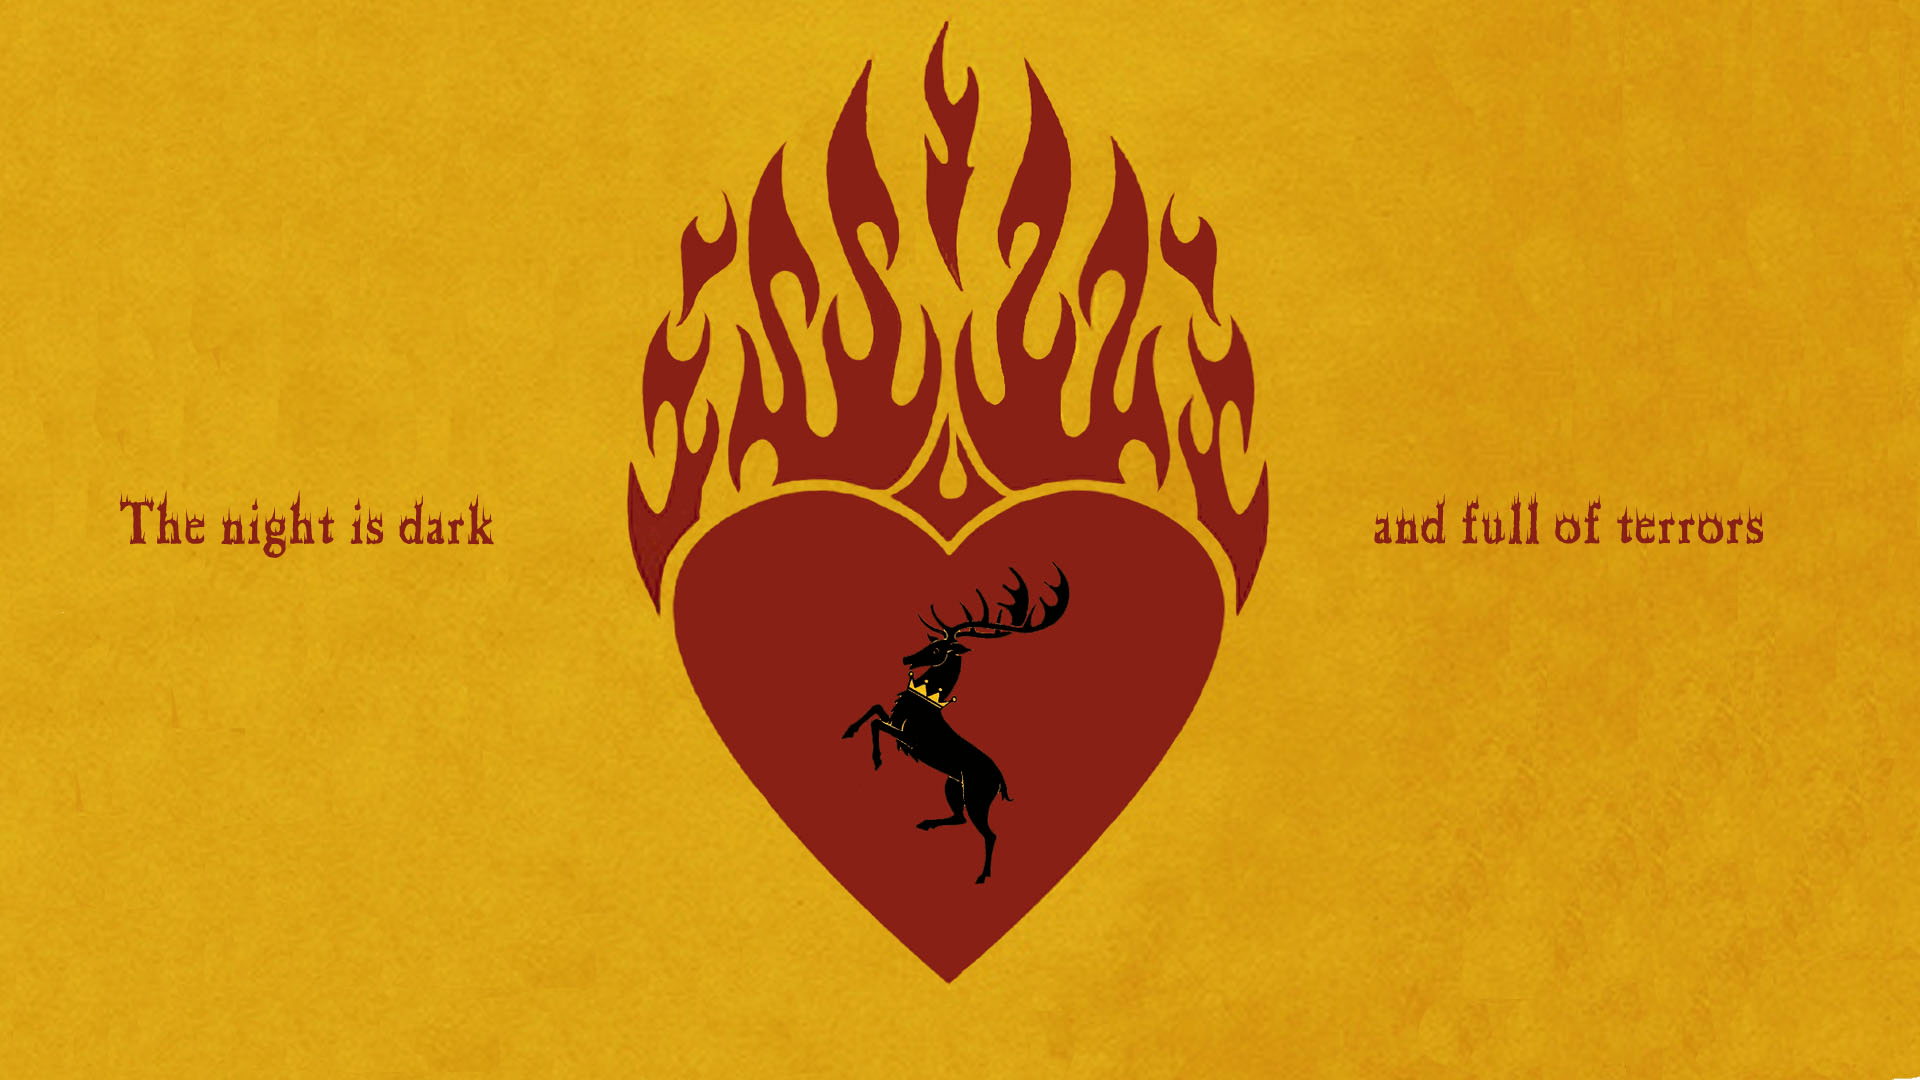 Here's a sample from my collection of Game of Thrones wallpaper